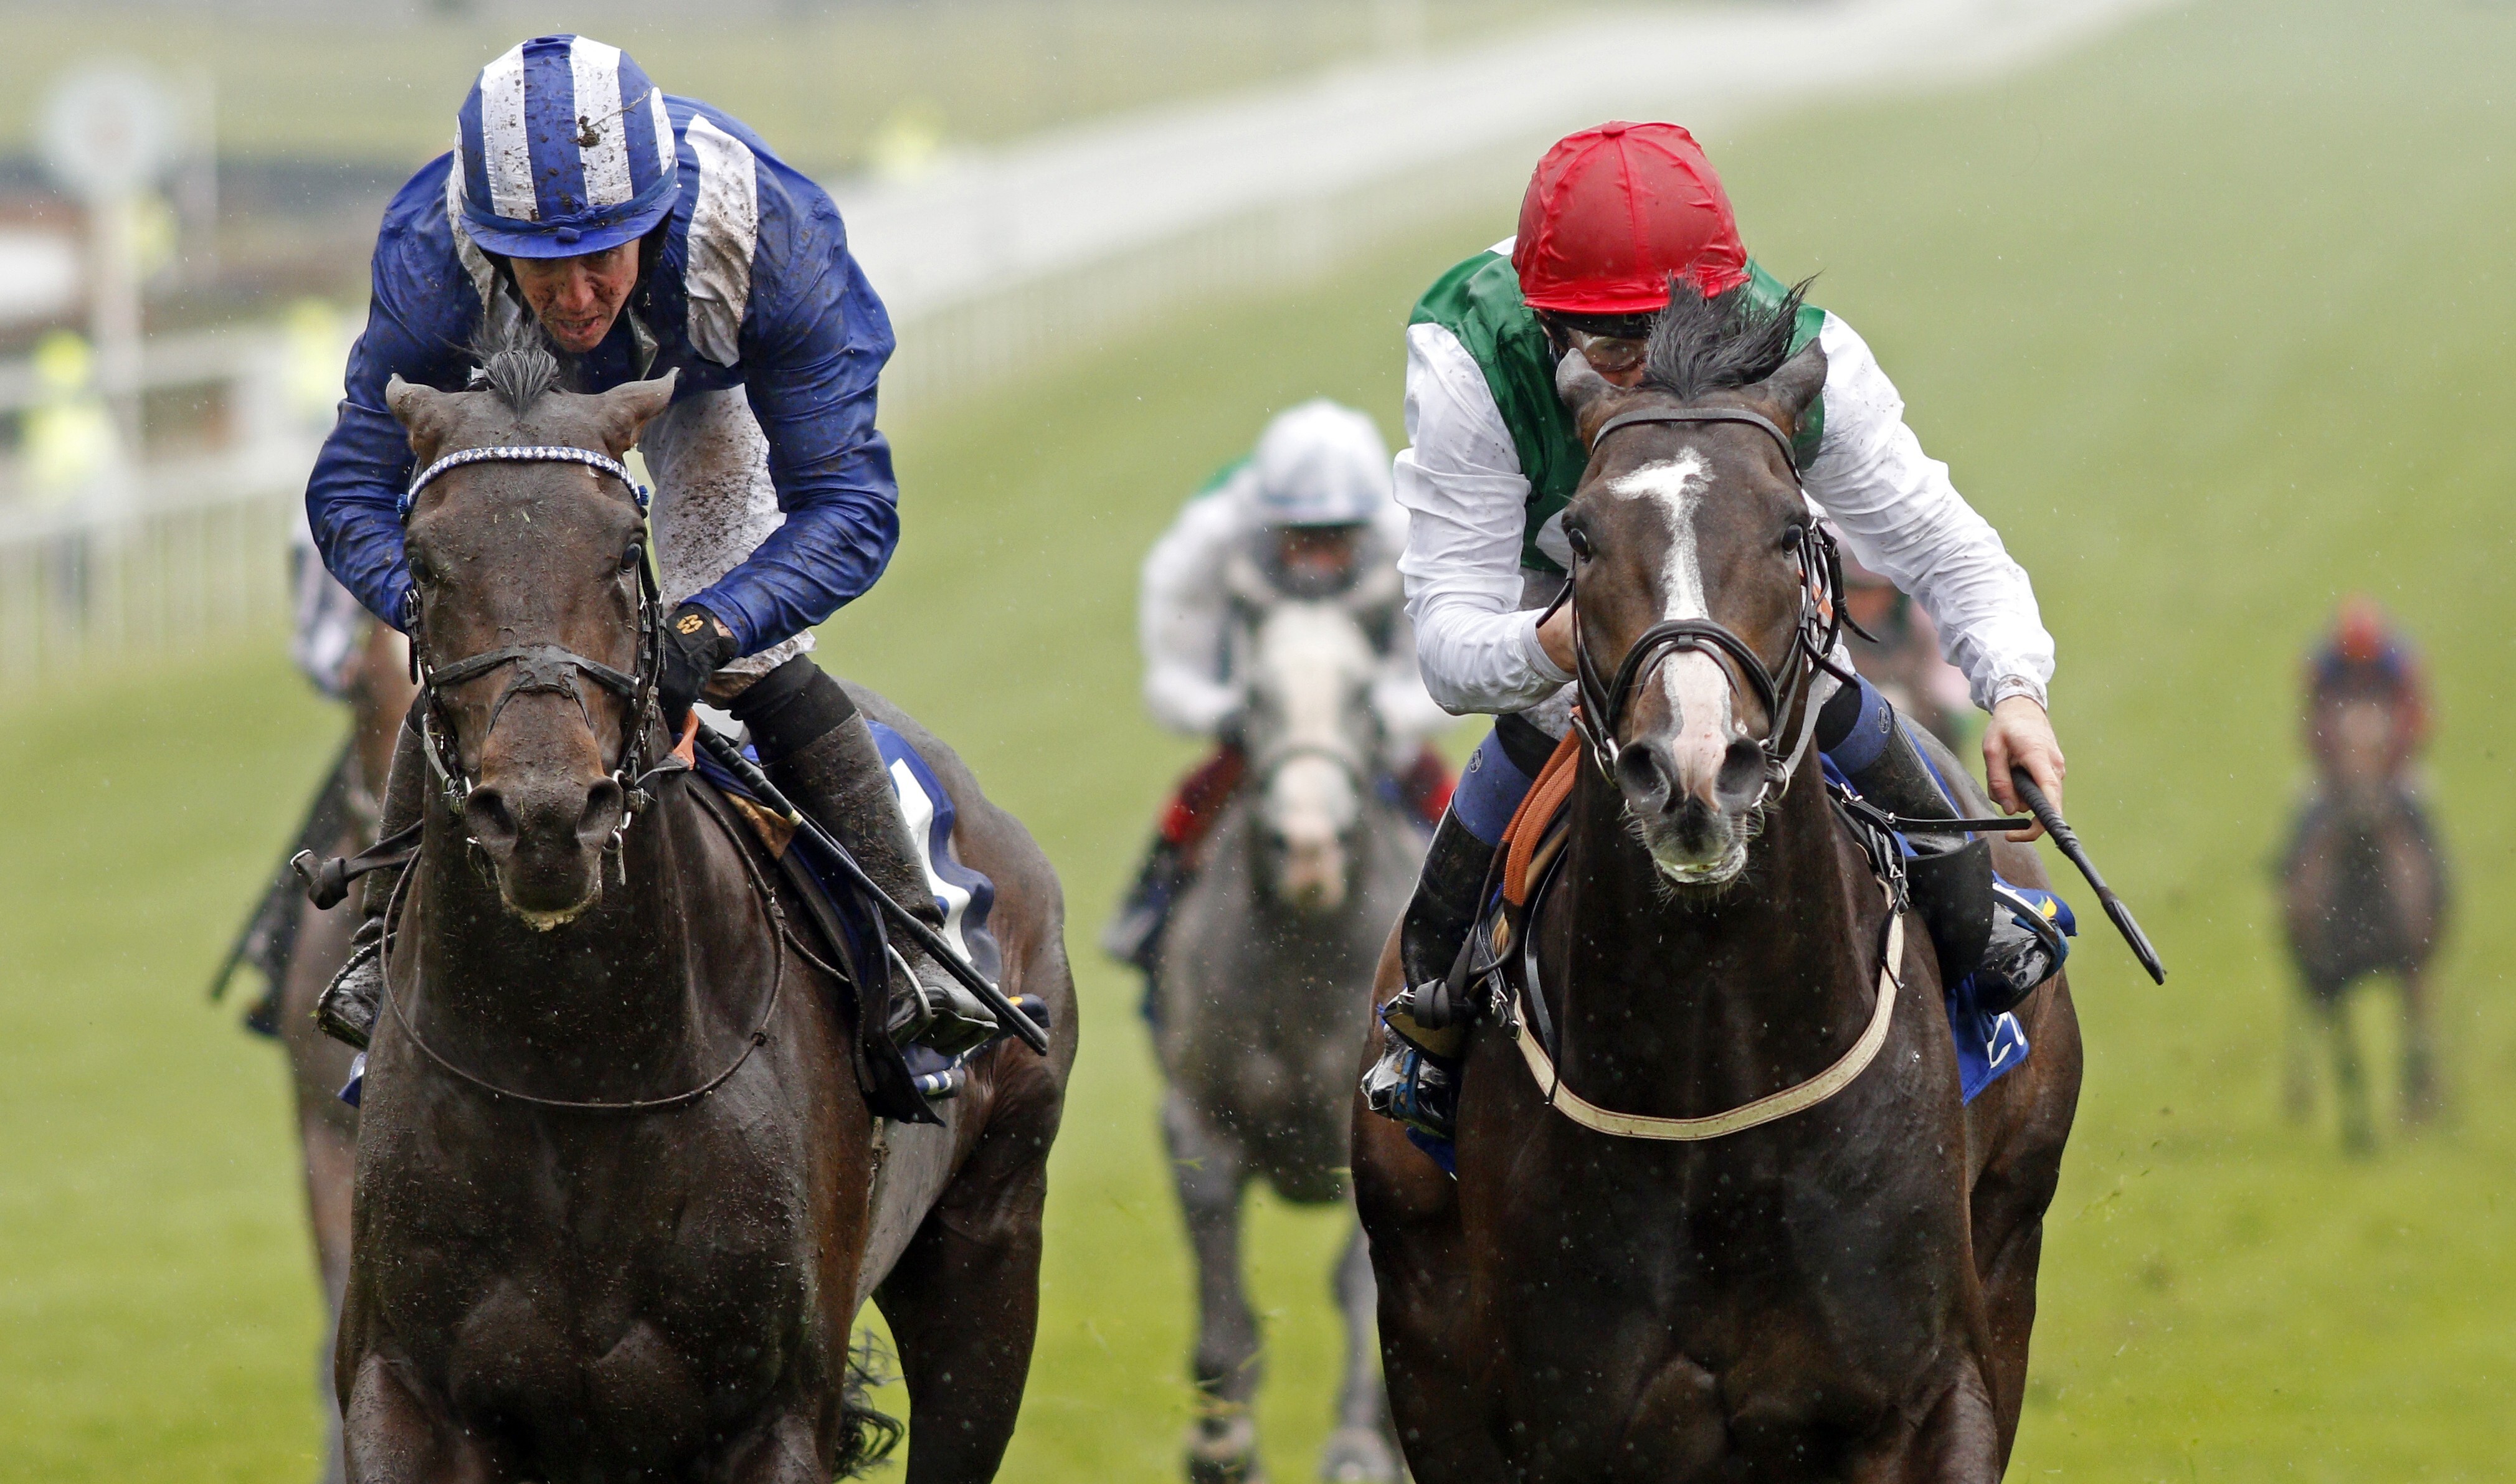 Pyledriver (right) beating Al Aasy in the Group One Coronation Cup at Epsom in June. Photo: Racingfotos.com